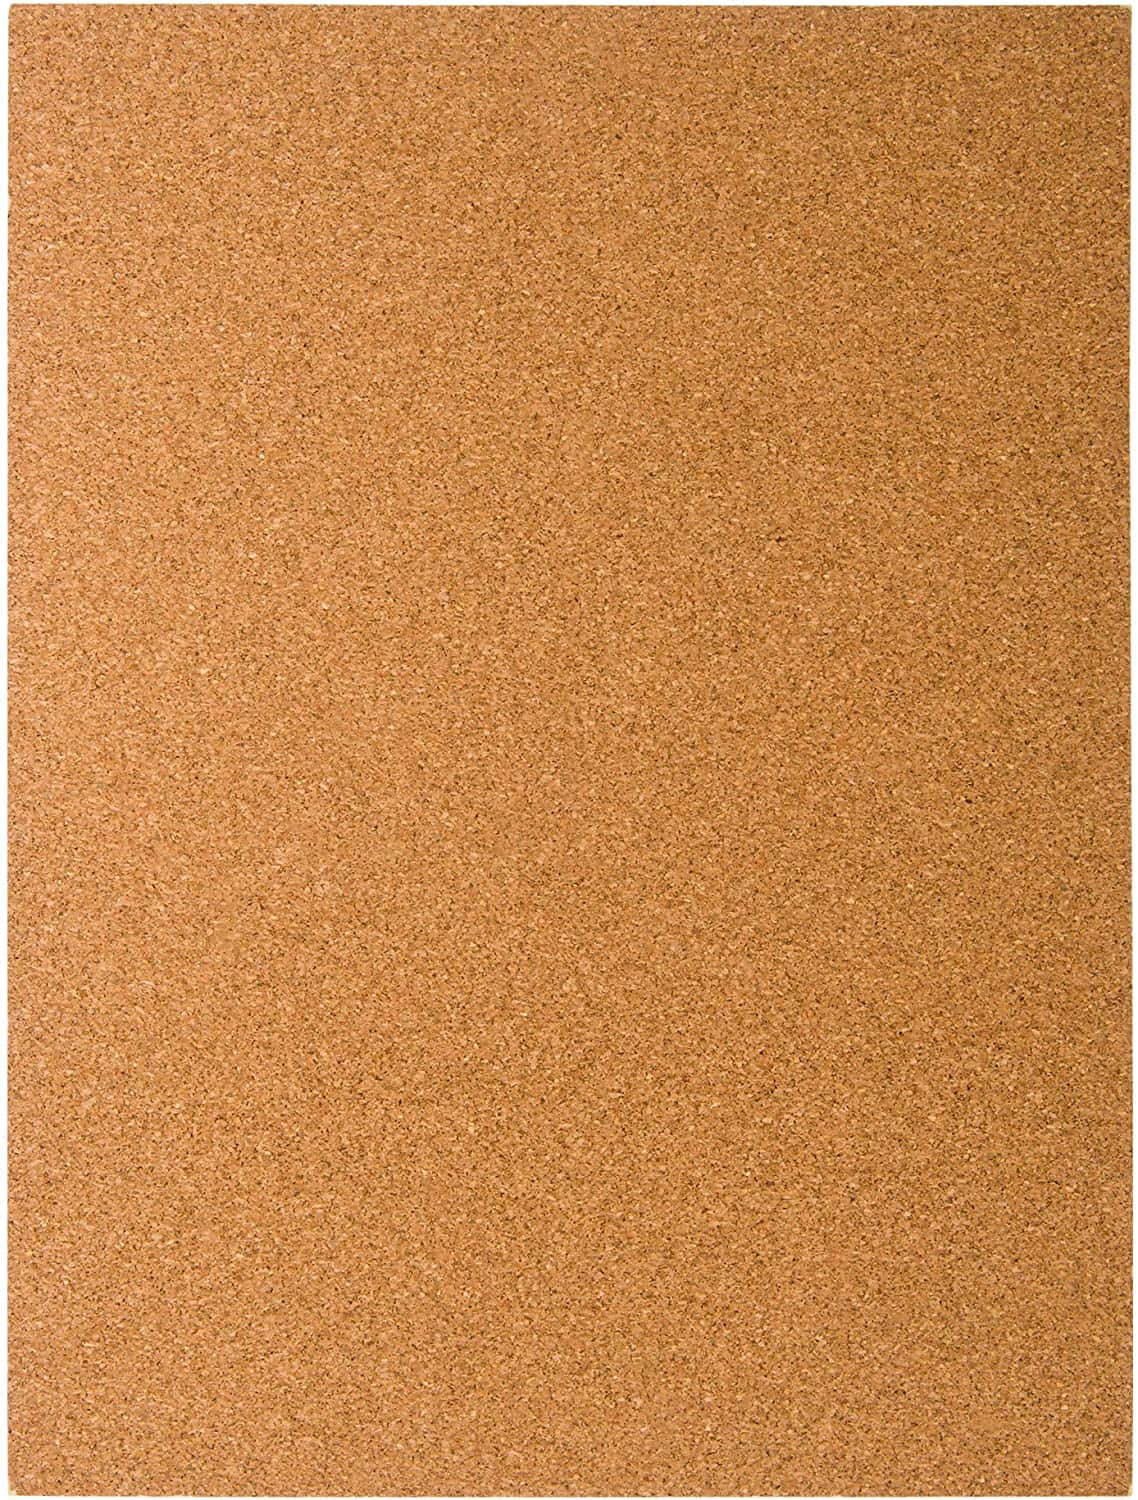 A Brown Cork Board On A White Background